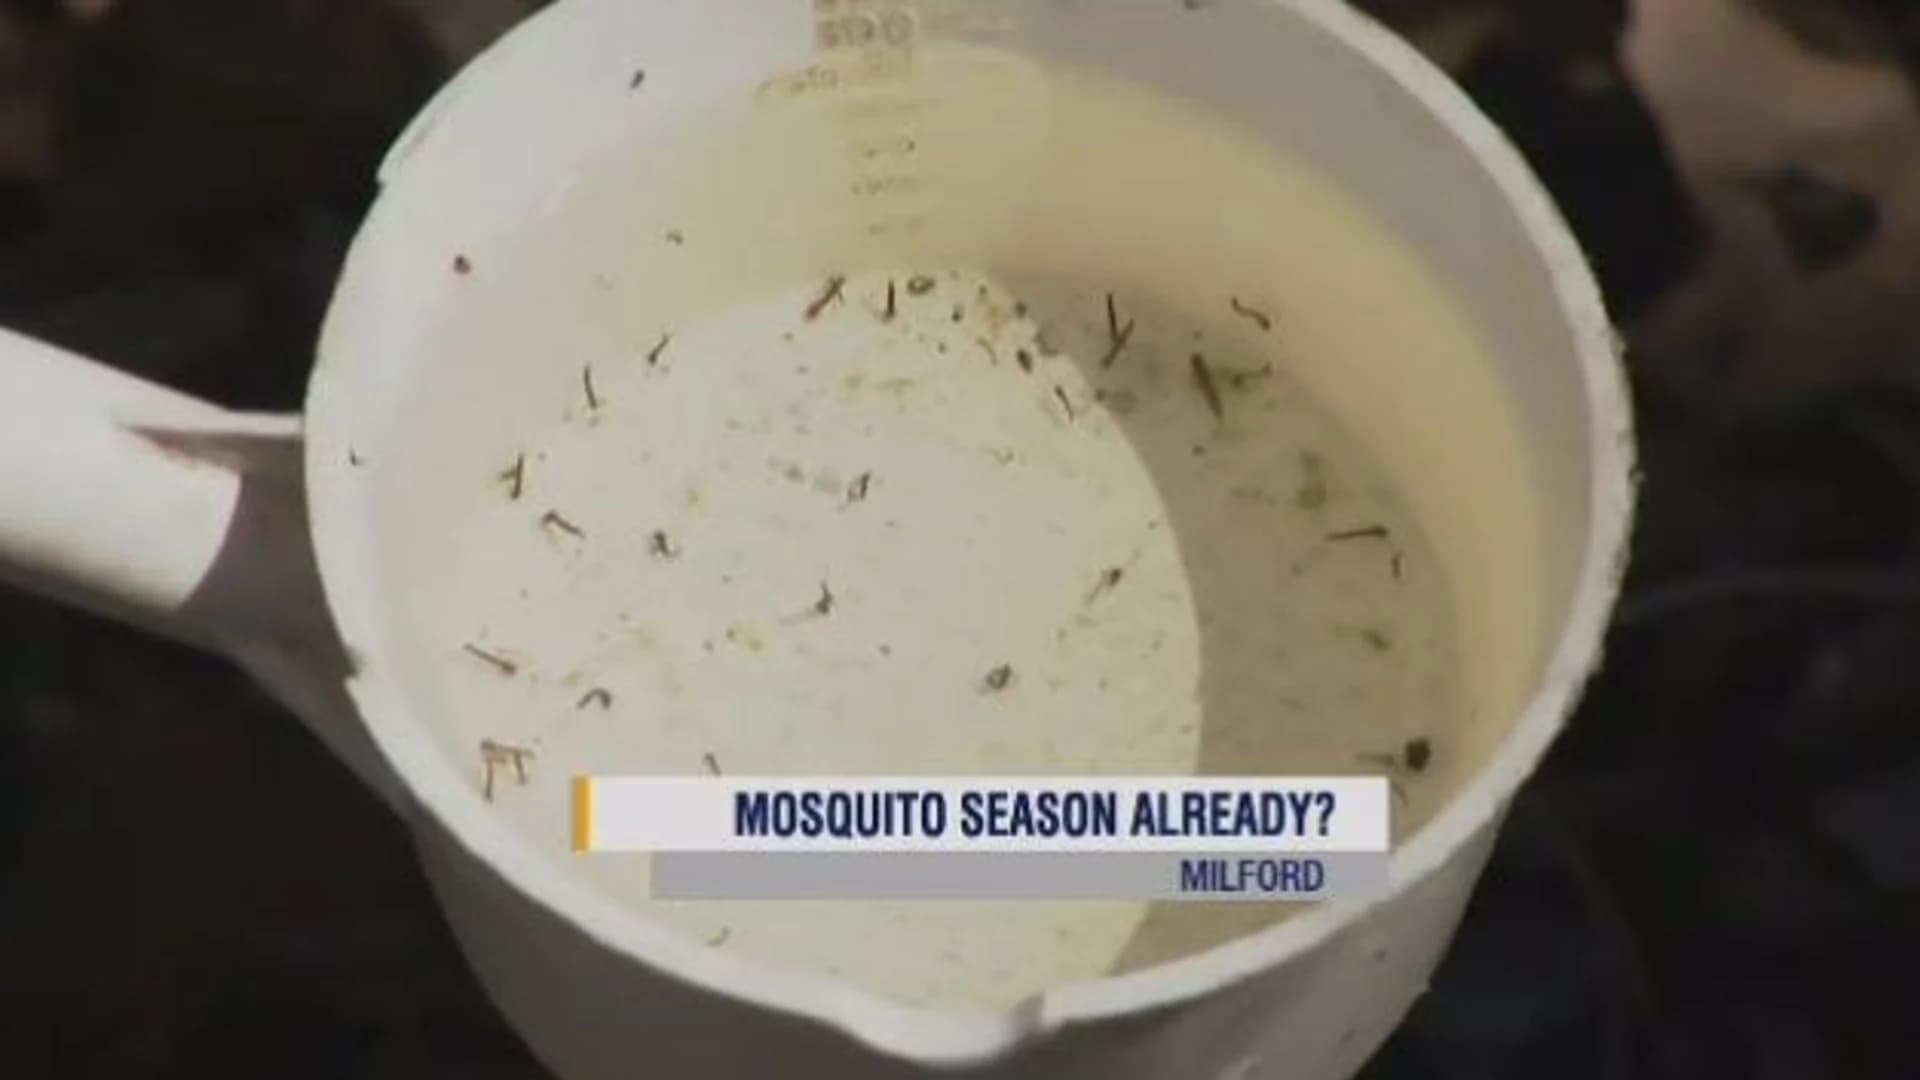 Crews prepare for mosquito season at Eisenhower Park in Milford